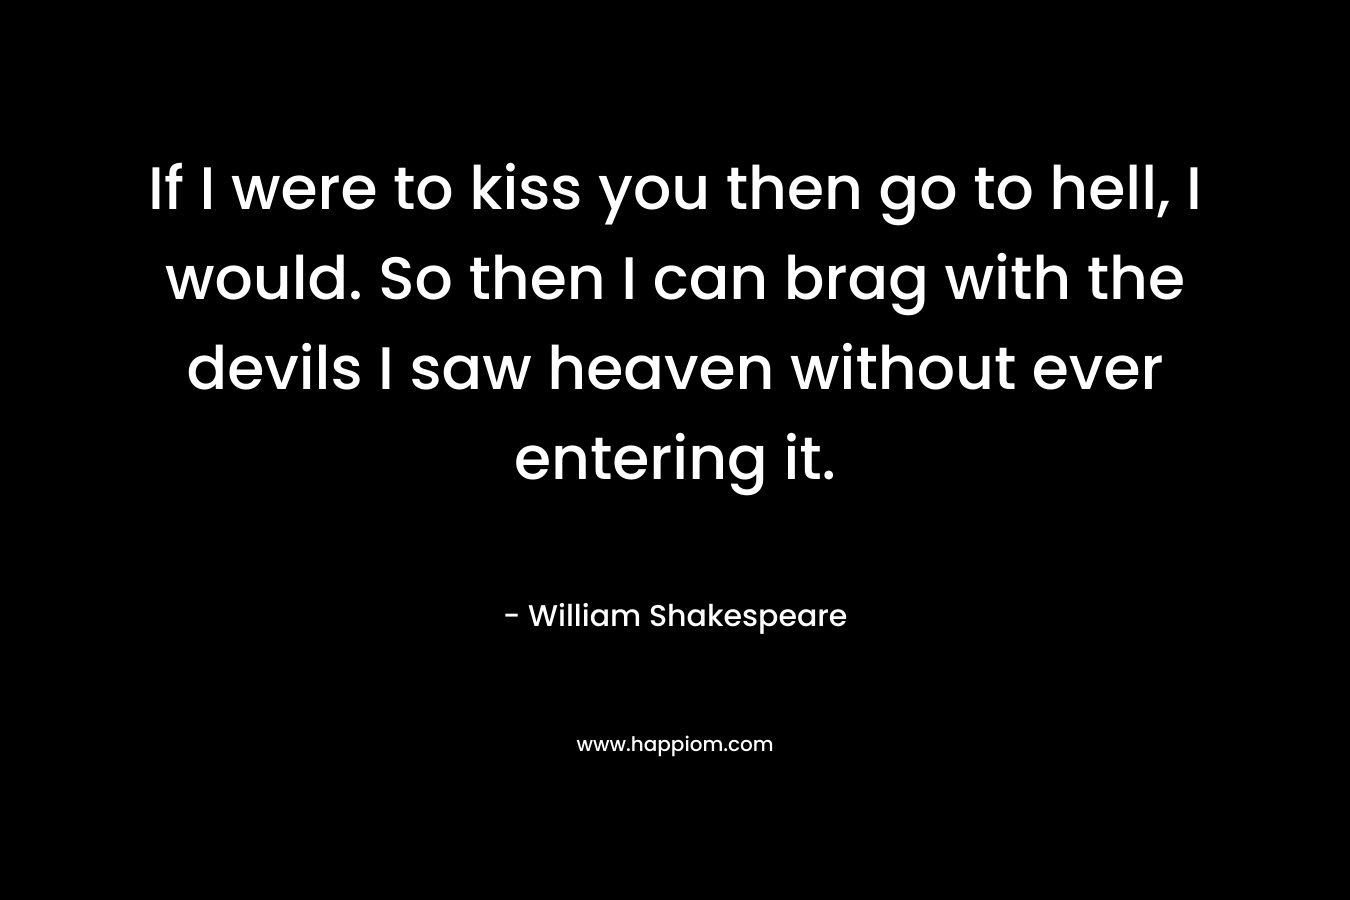 If I were to kiss you then go to hell, I would. So then I can brag with the devils I saw heaven without ever entering it. – William Shakespeare